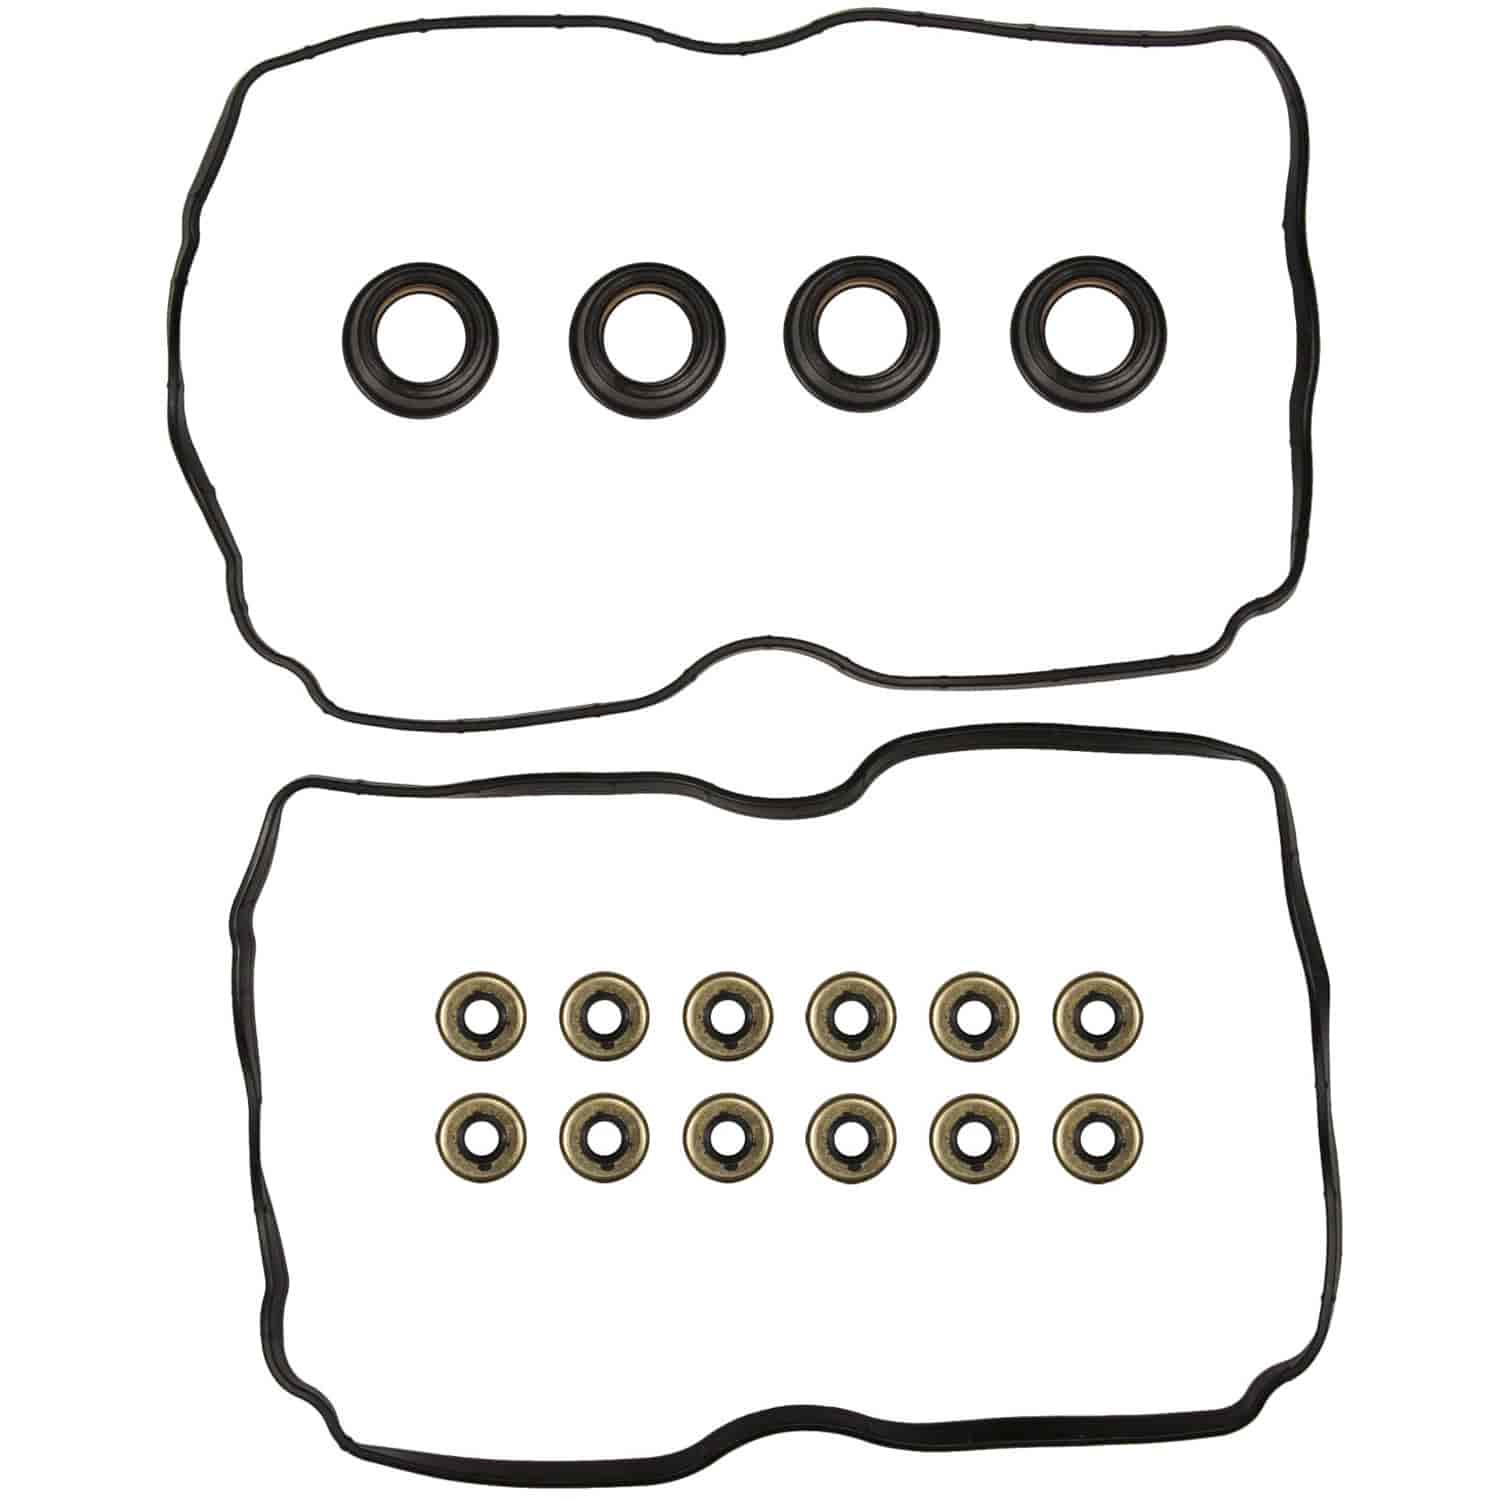 Valve Cover Gasket Set for 1999-2006 Subaru H4 2.2/2.5L in Molded Rubber